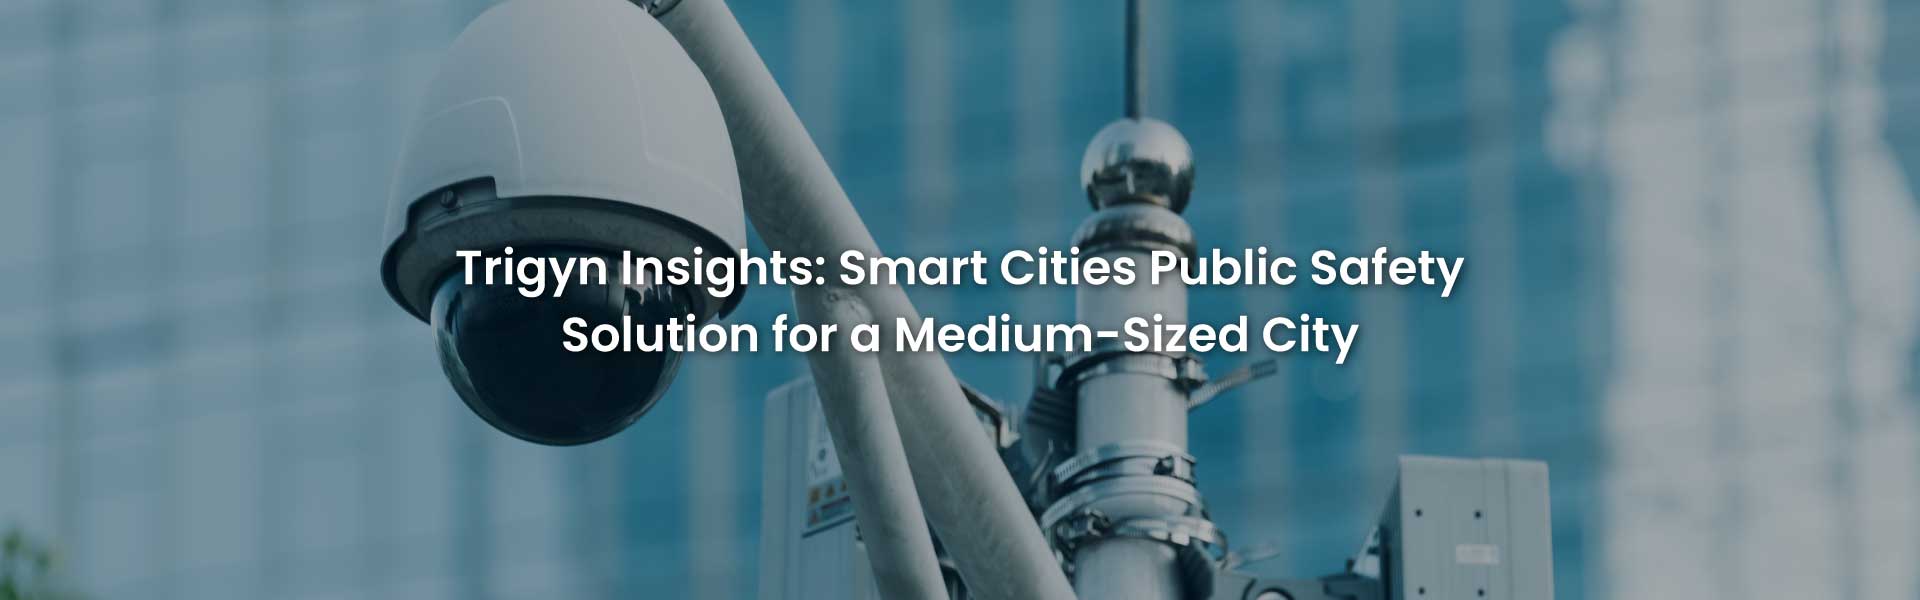 Smart Cities Public Safety Solution for a Medium-Sized City